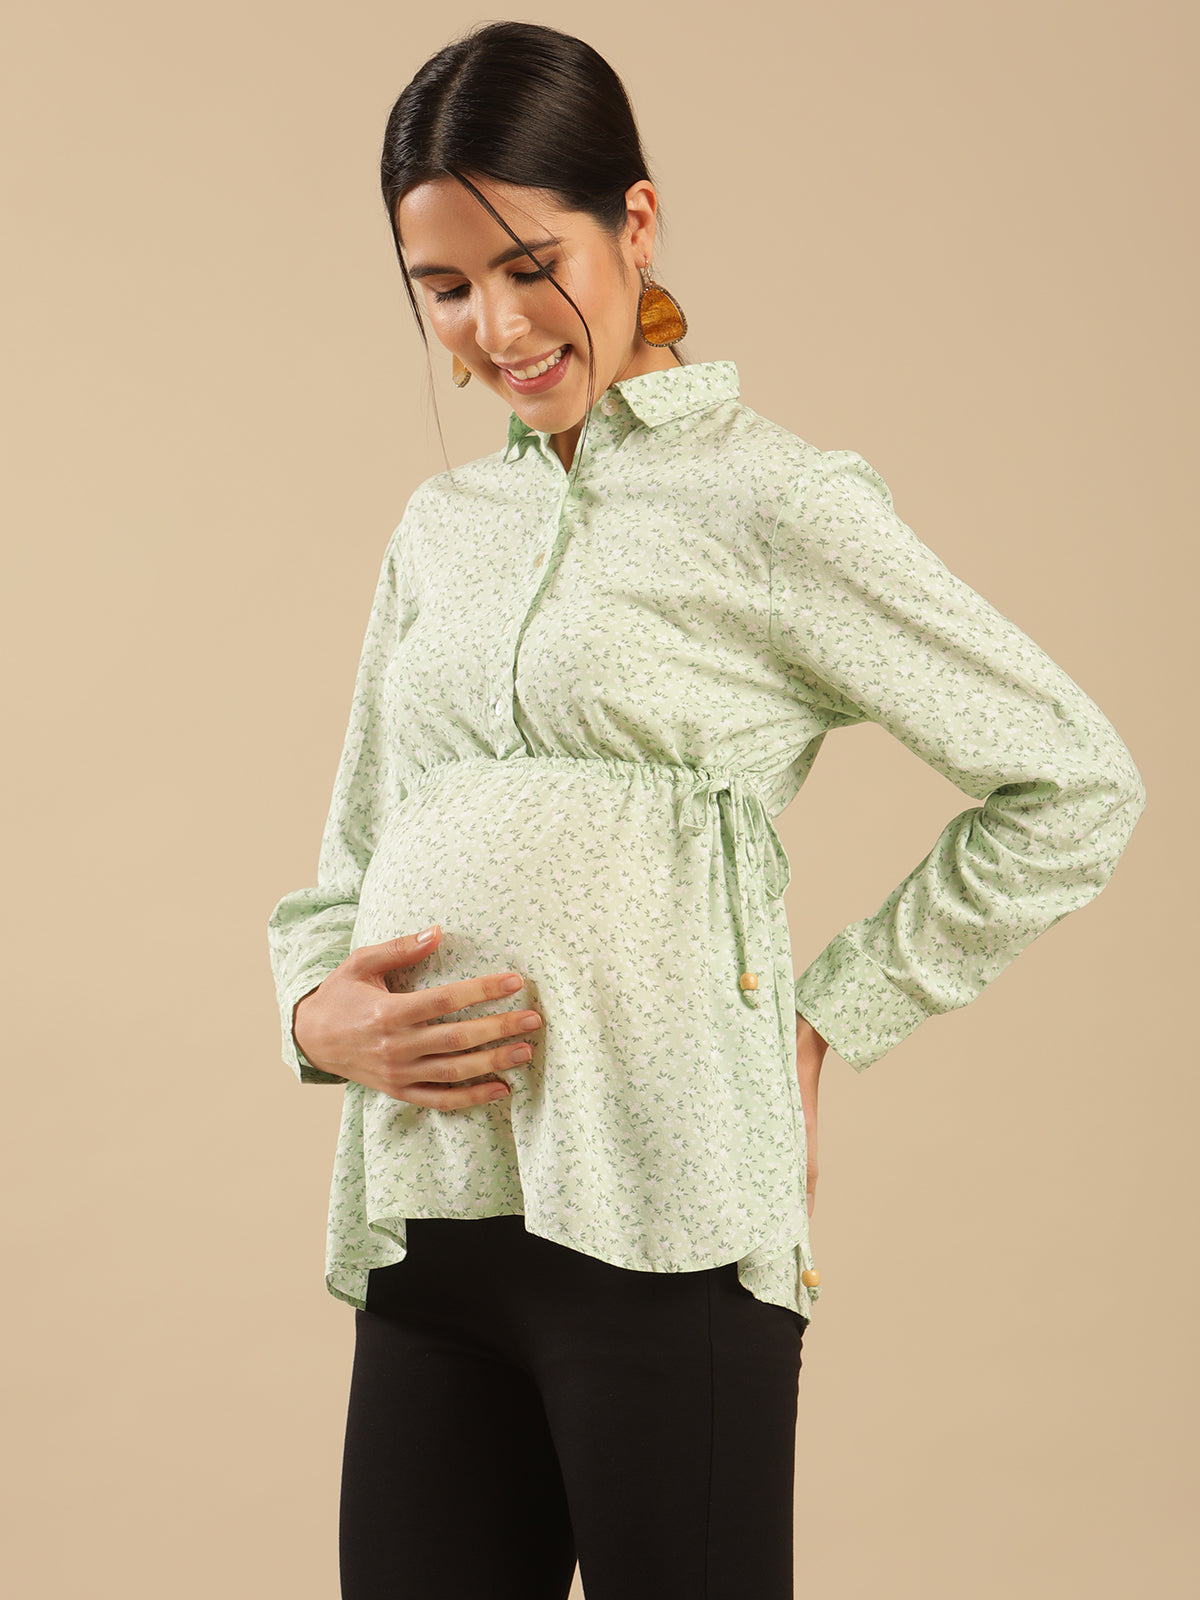 Nora Green Cotton Printed Collared Tie Maternity Top